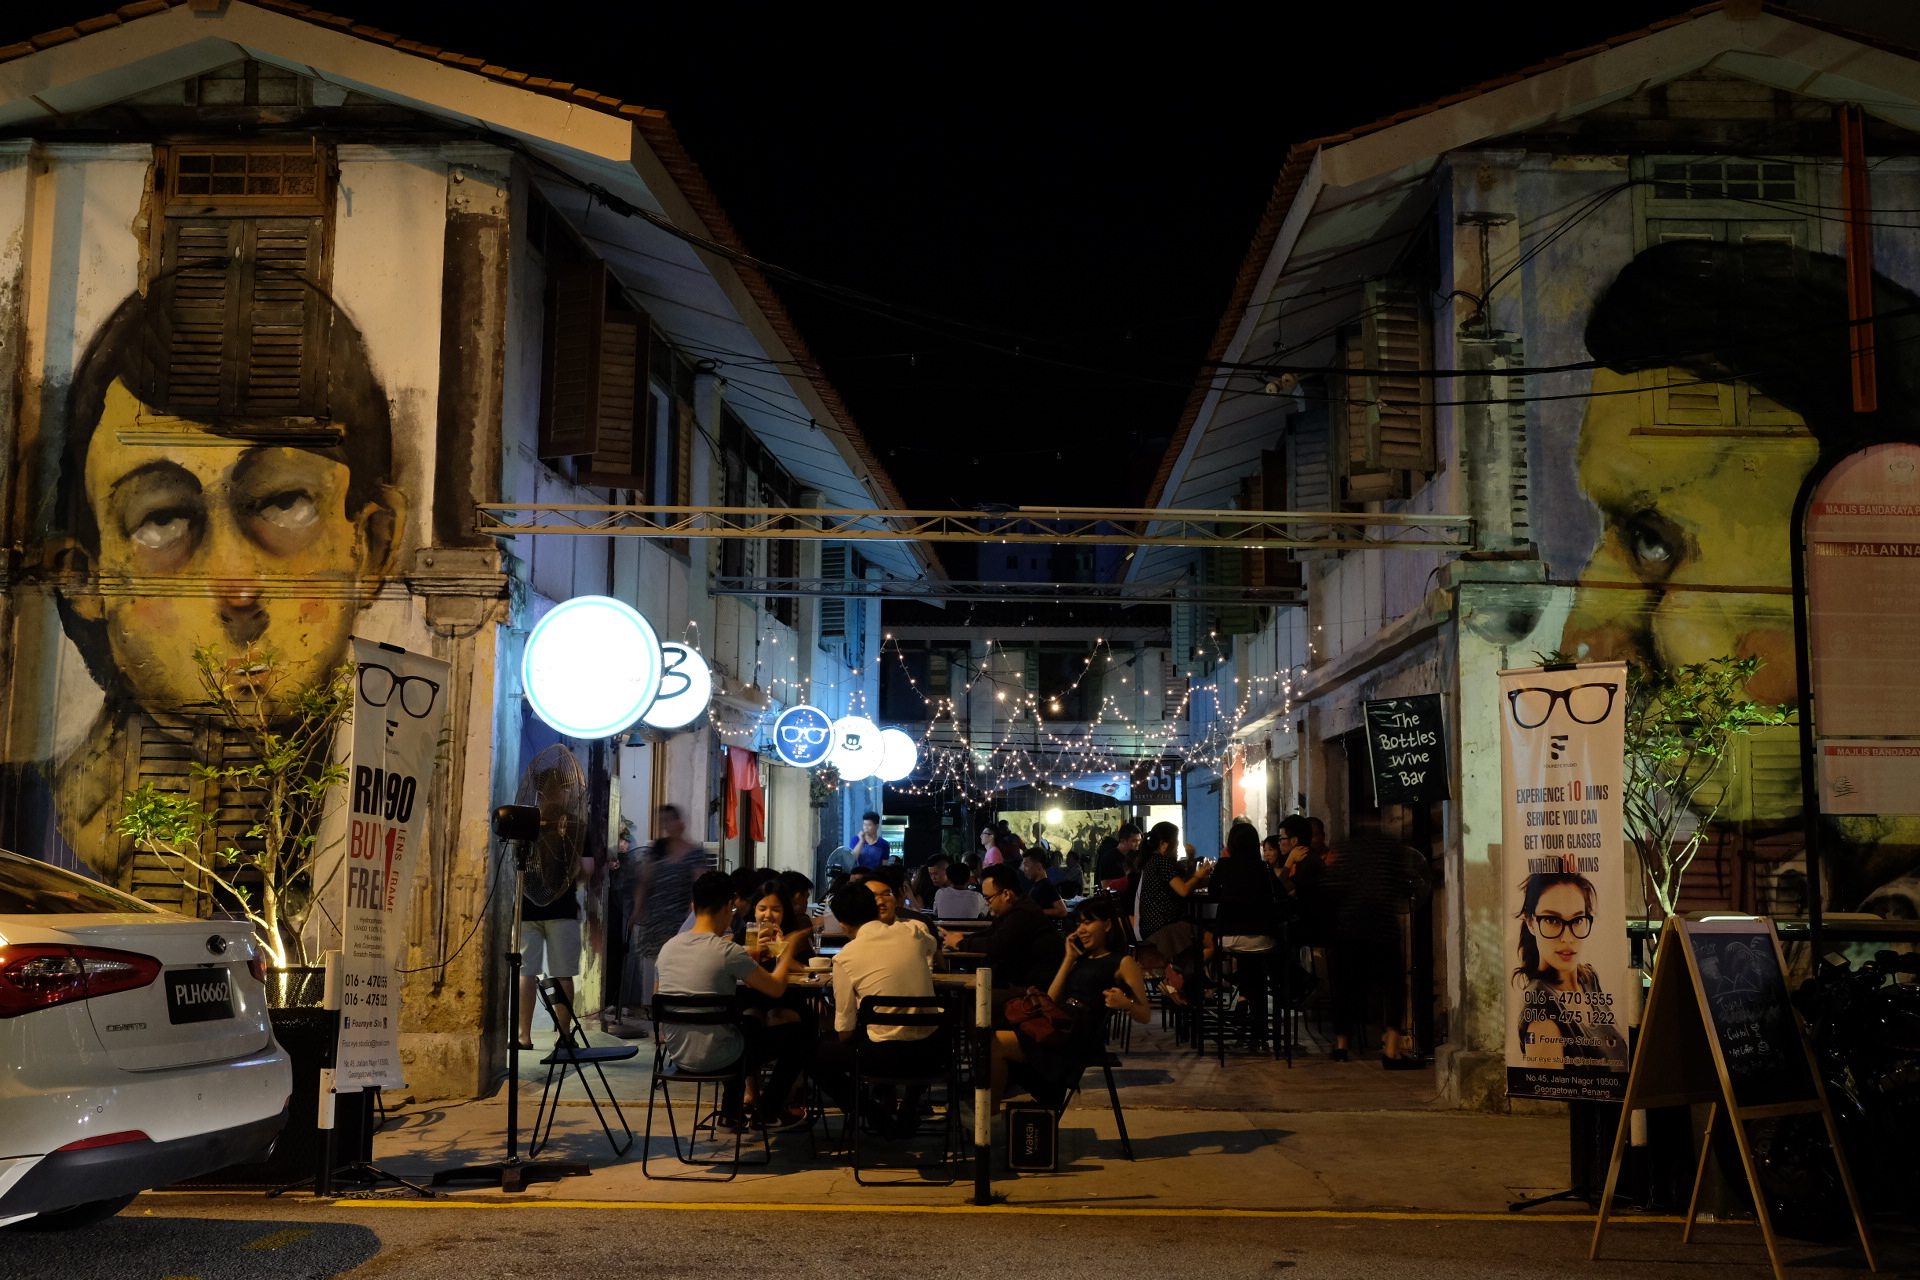 Malaysian state Penang is the country’s first to ban Airbnb and similar short-term lets, after receiving numerous complaints about unruly tourists disturbing local residents. Photo: Chan Kit Yeng